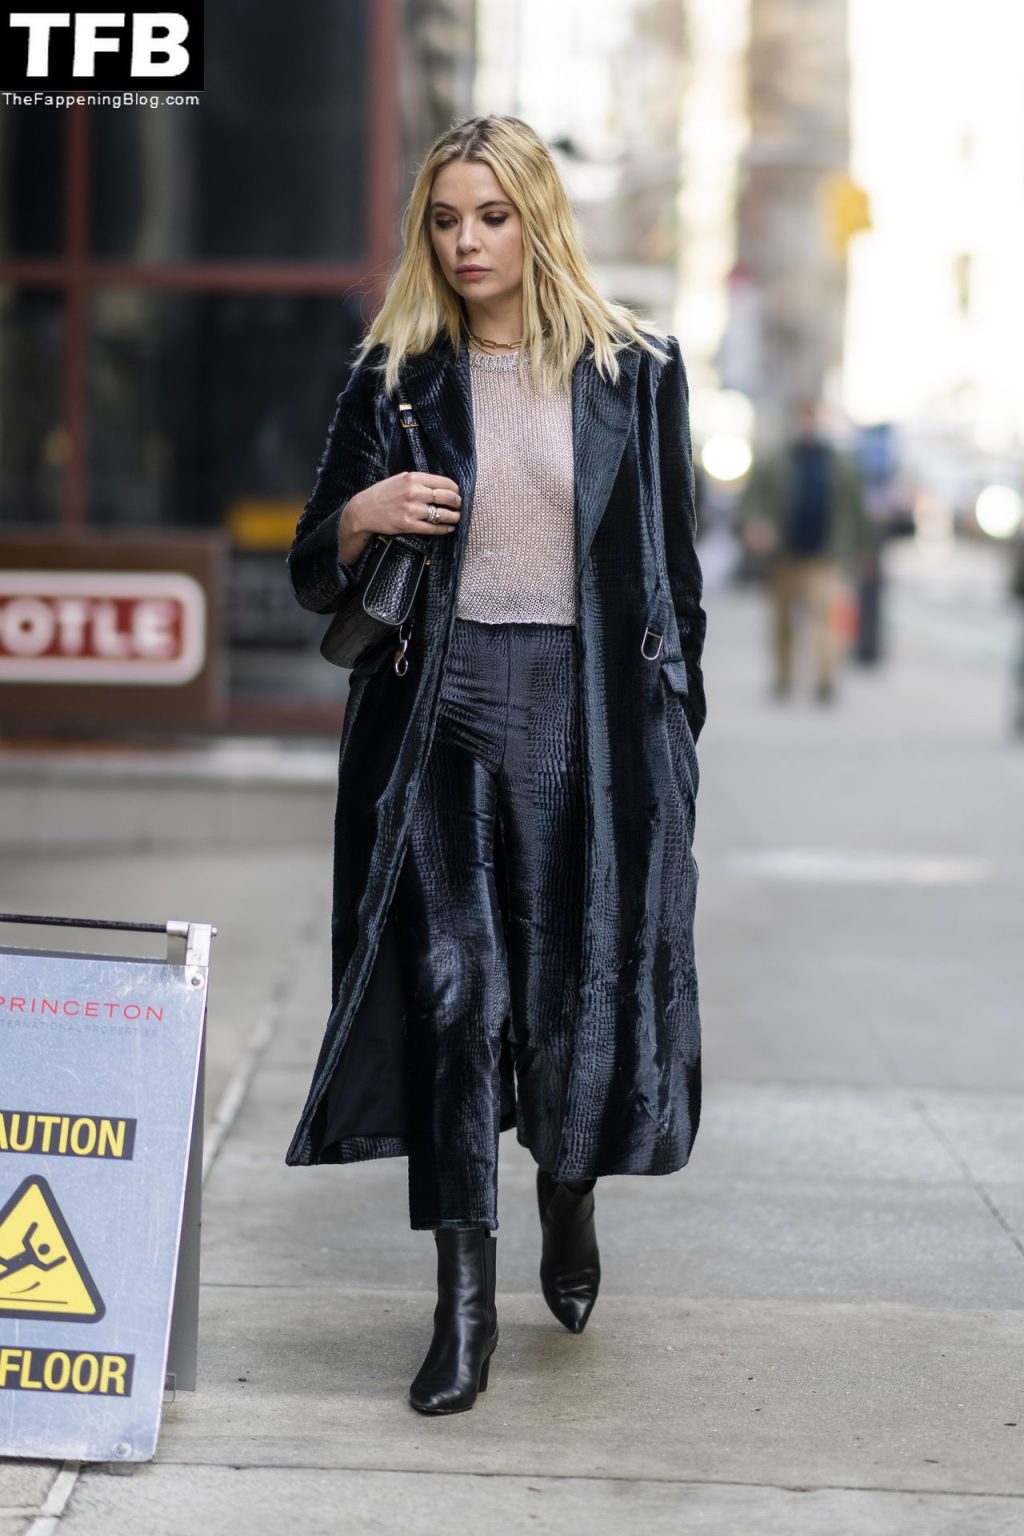 Ashley Benson Sexy The Fappening Blog 12 1024x1536 - Braless Ashley Benson Looks Stylish While Heading to a Meeting in NYC (20 Photos)